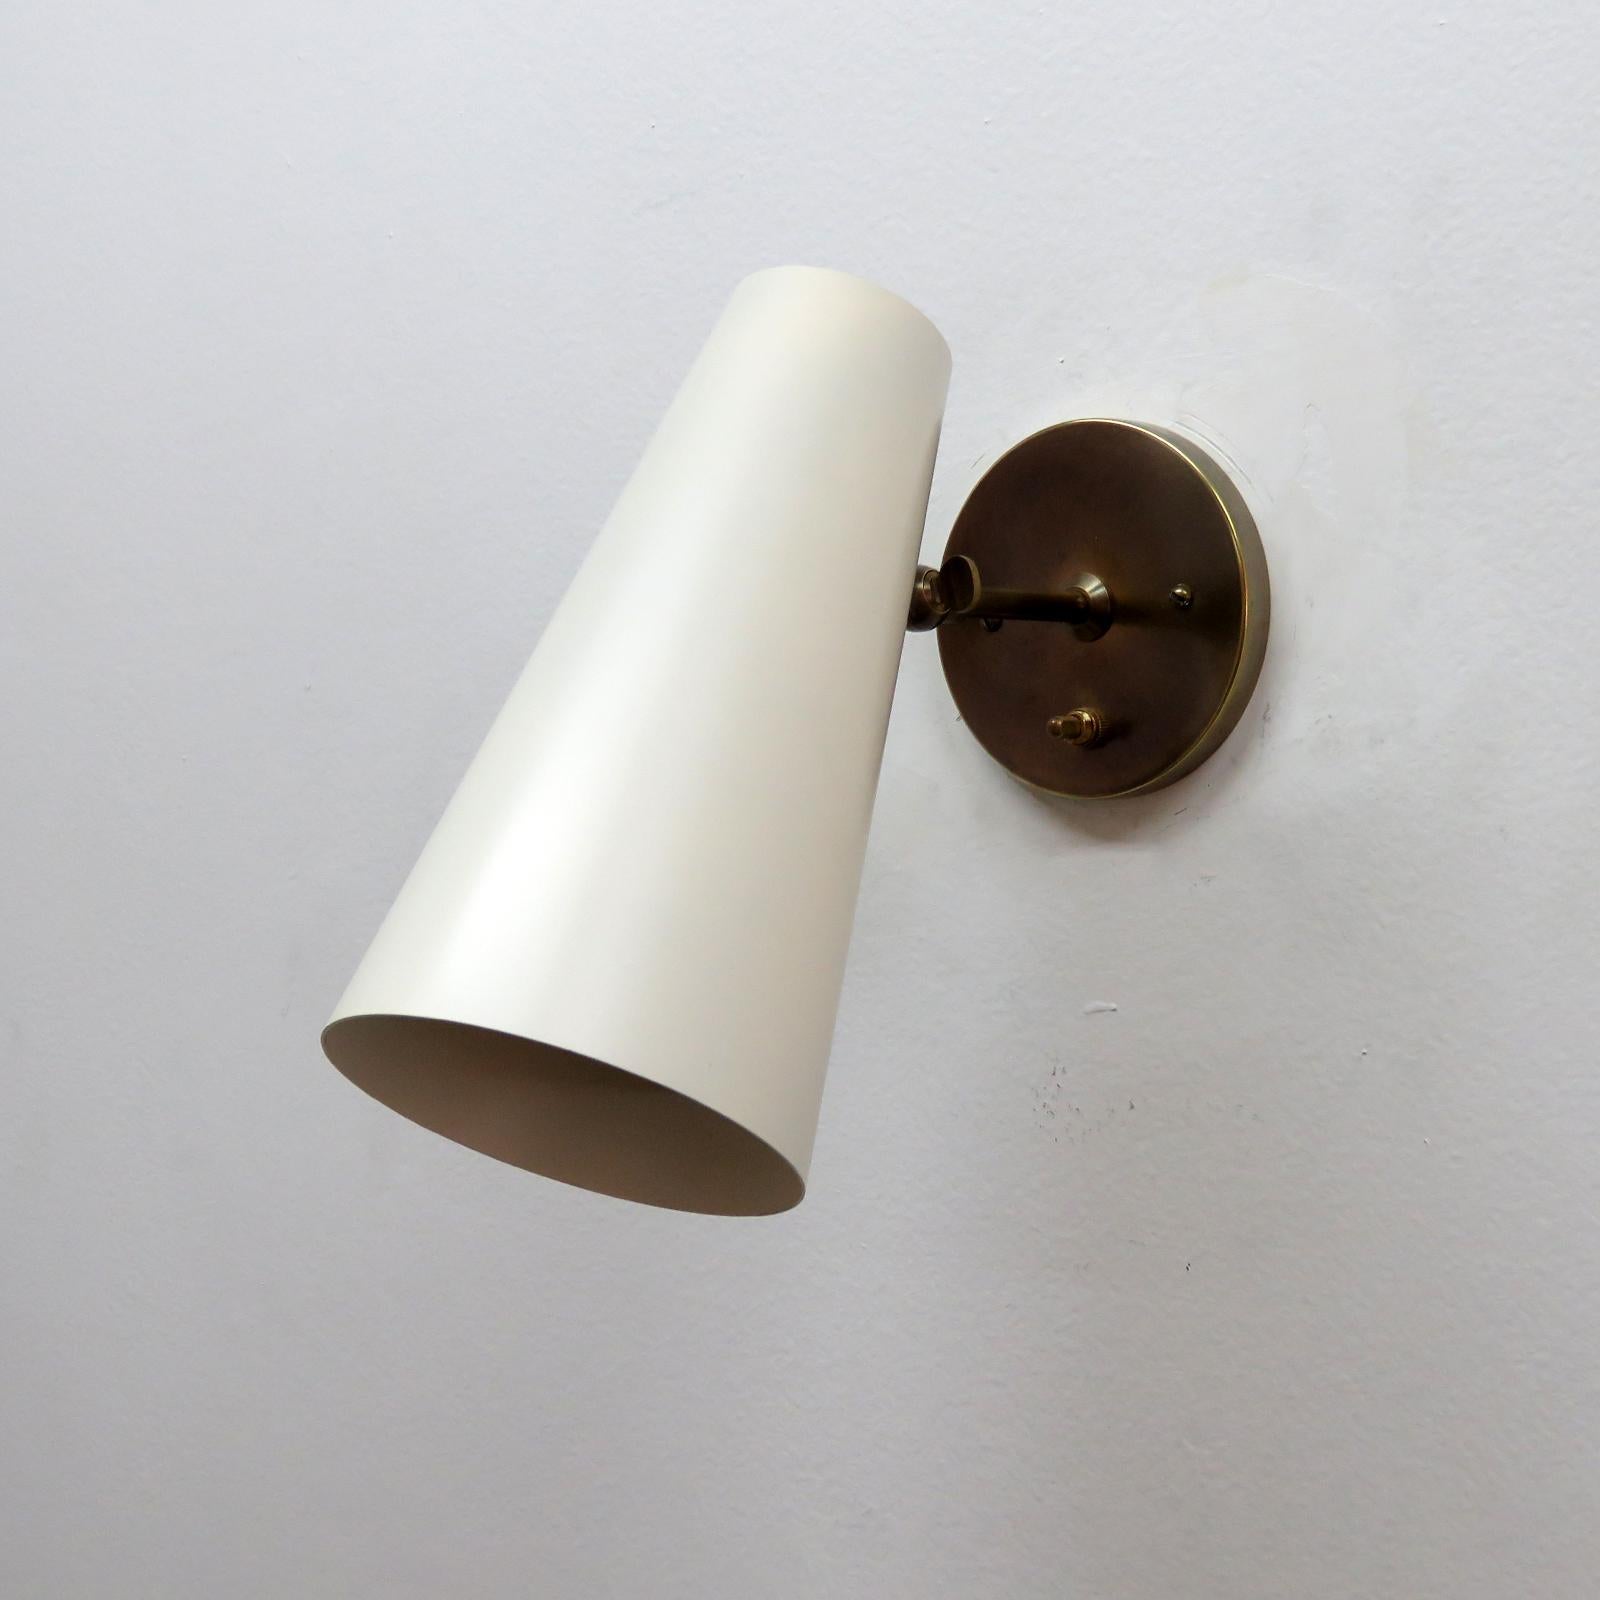 Elegant articulate 'Copa' wall lights designed by Gallery L7, handcrafted and finished in Los Angeles from American brass with an eggshell colored aluminum cone on aged brass hardware, the angle of the cone can be adjusted, individual on/off switch